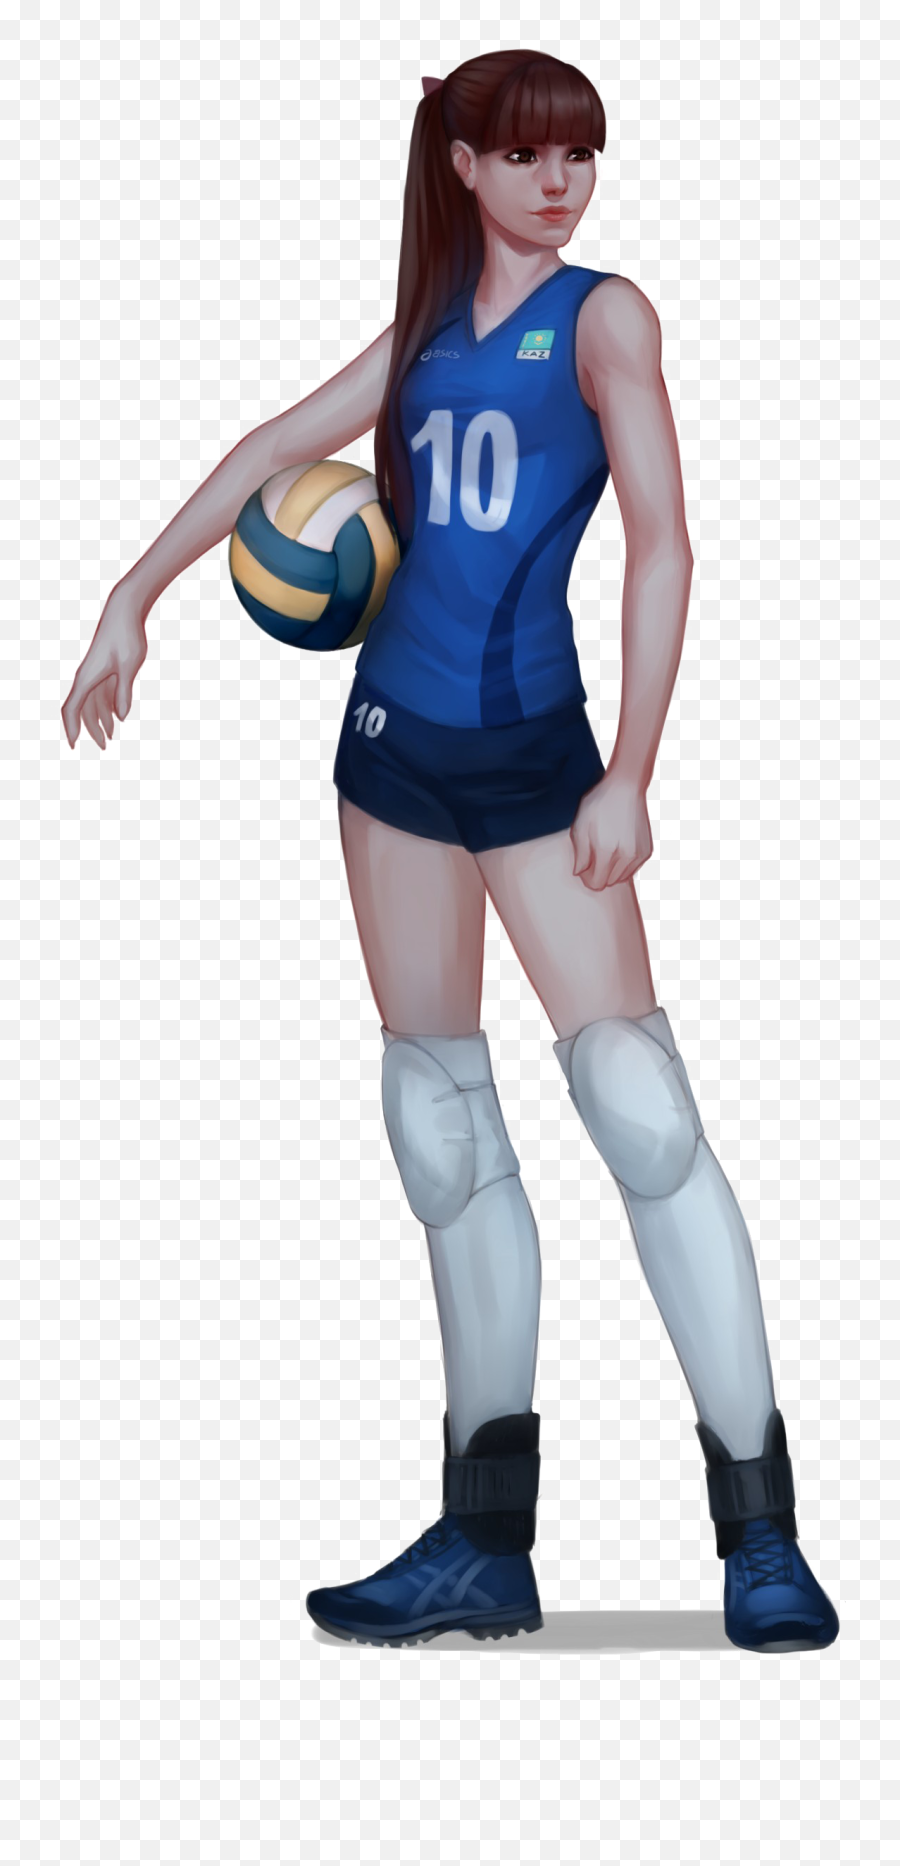 Volleyball Player Png Download Image - Anime Girl Playing Volleyball,Volleyball Player Png